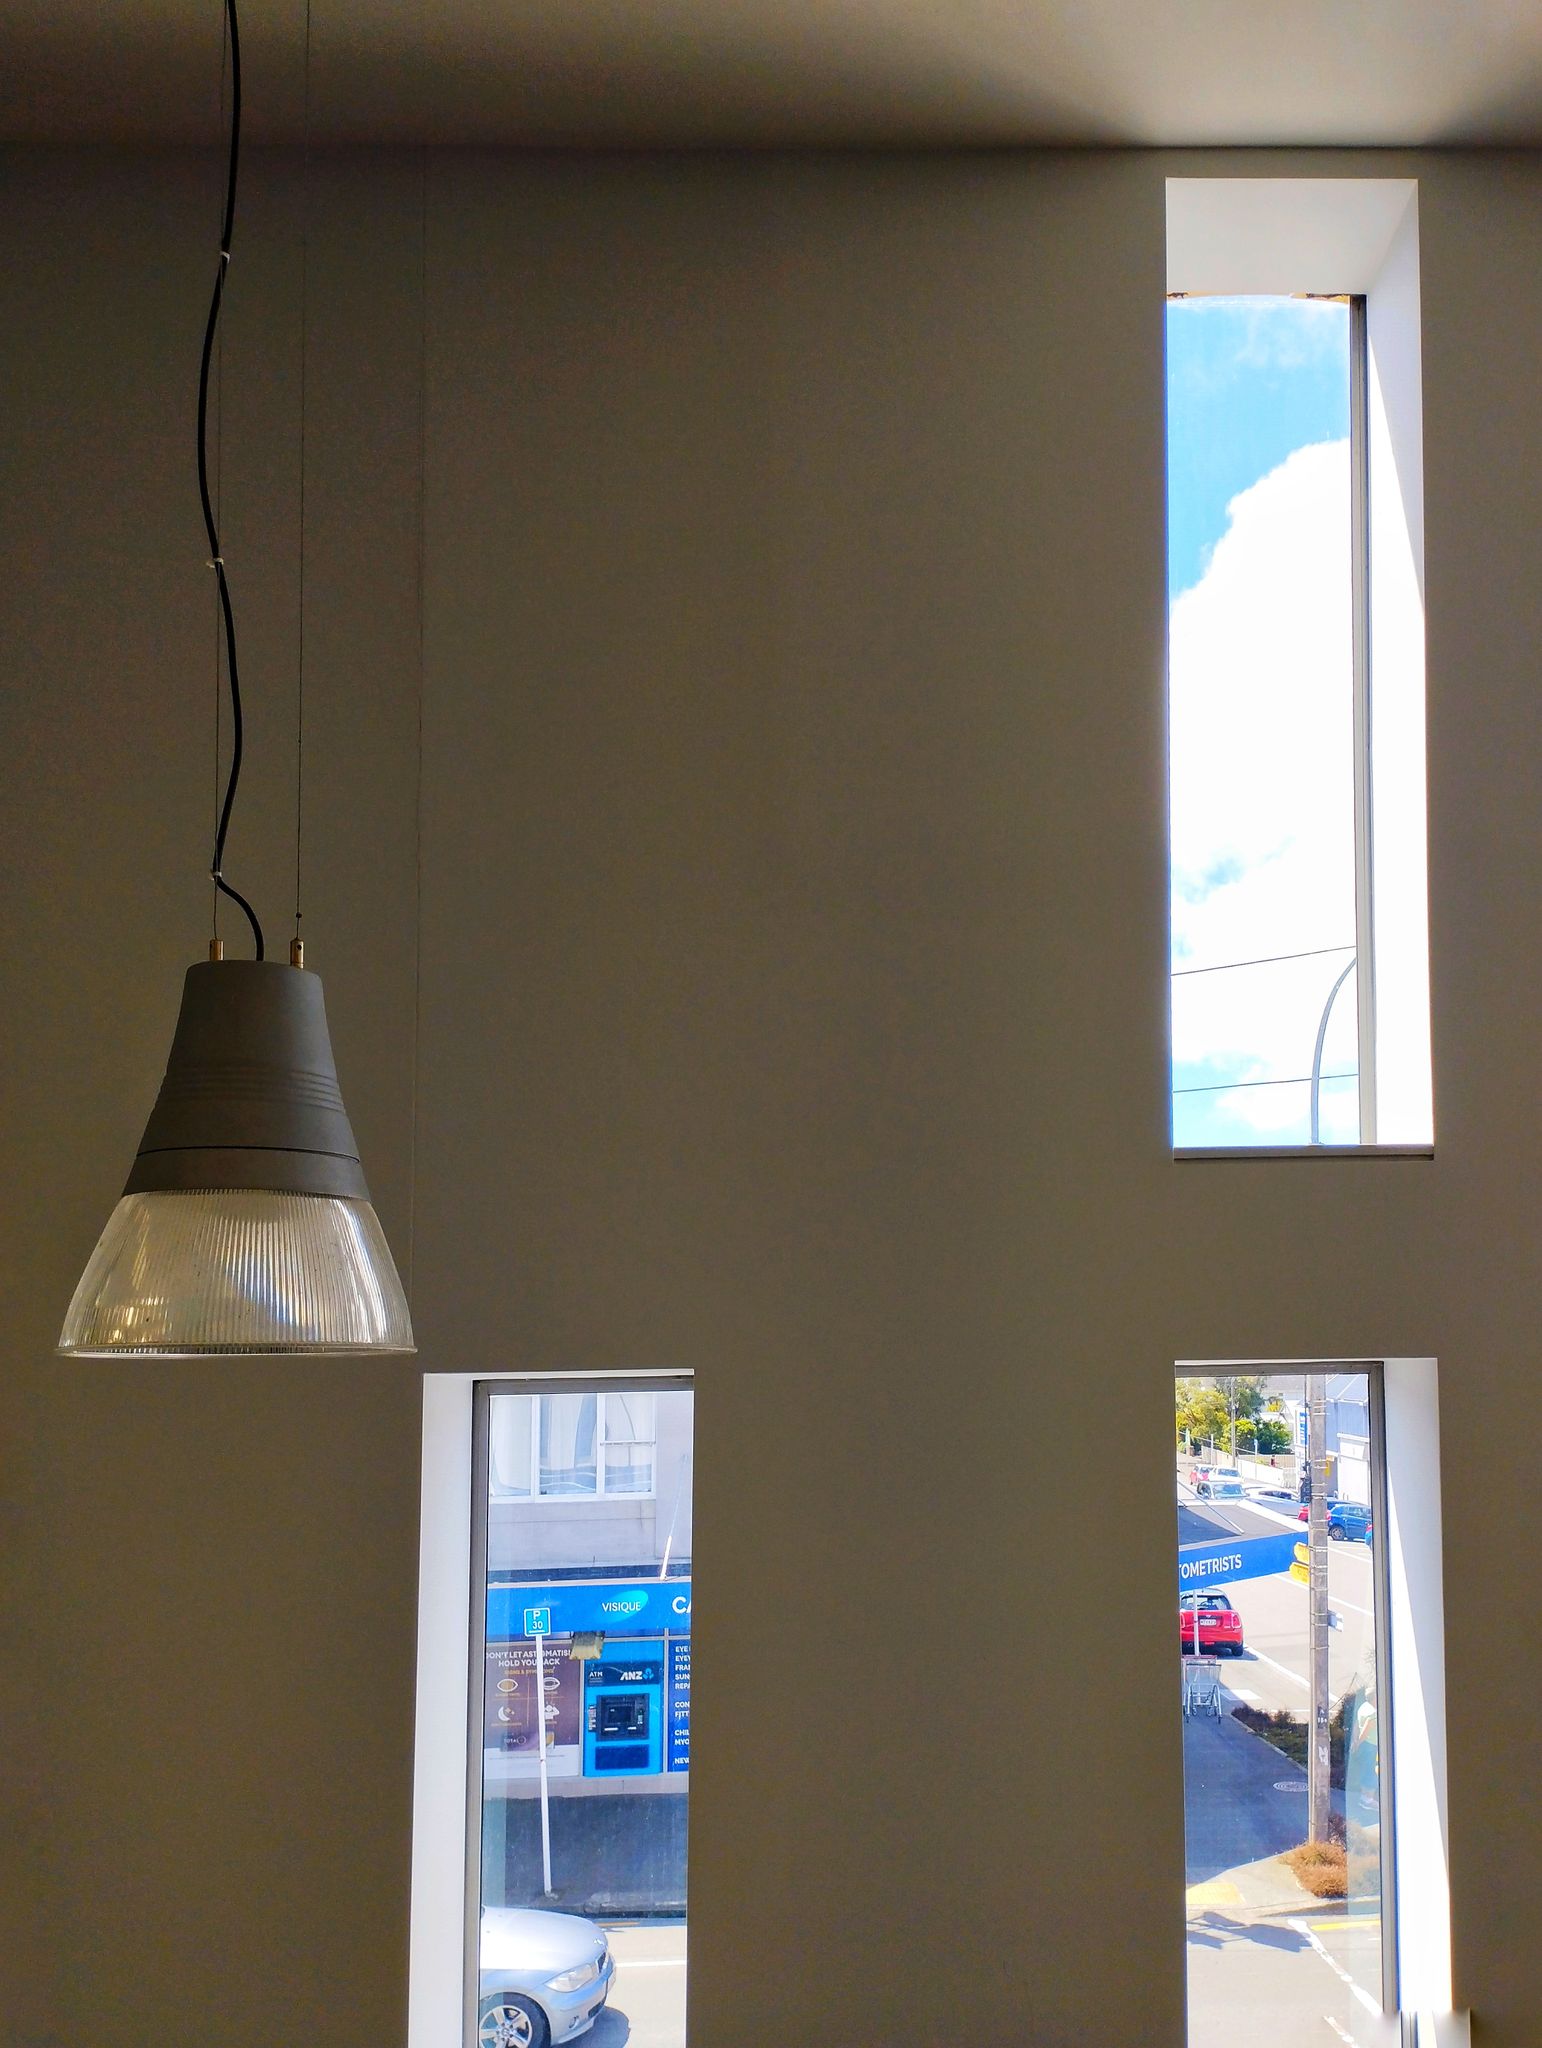 Three narrow windows in a white wall look out onto the street and blue sky. A conical light hangs on the left, the bottom level with the top corner of a narrow window.